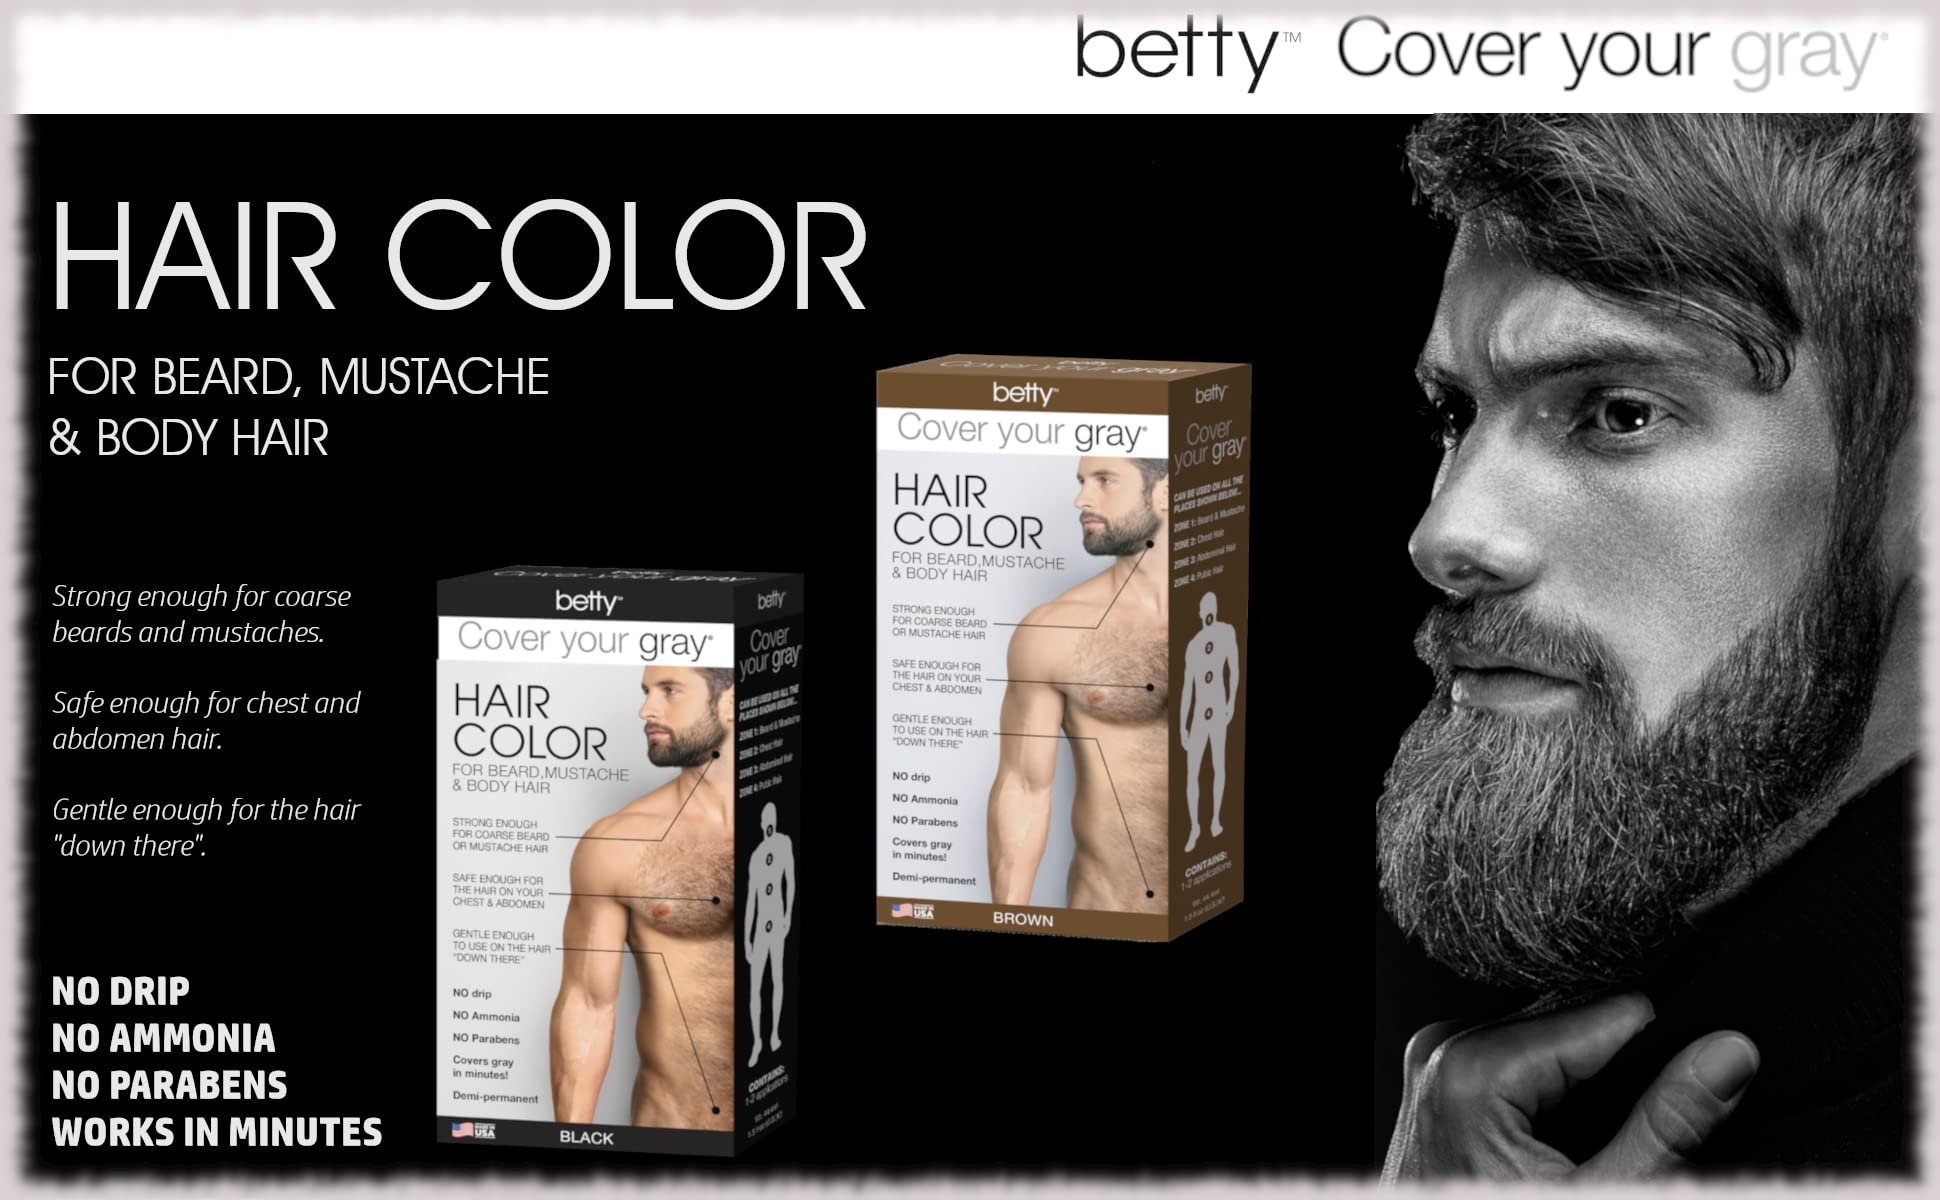 Betty Cover Your Gray Mens Hair Color for Beard, Mustache & Body Hair - Dark Brown